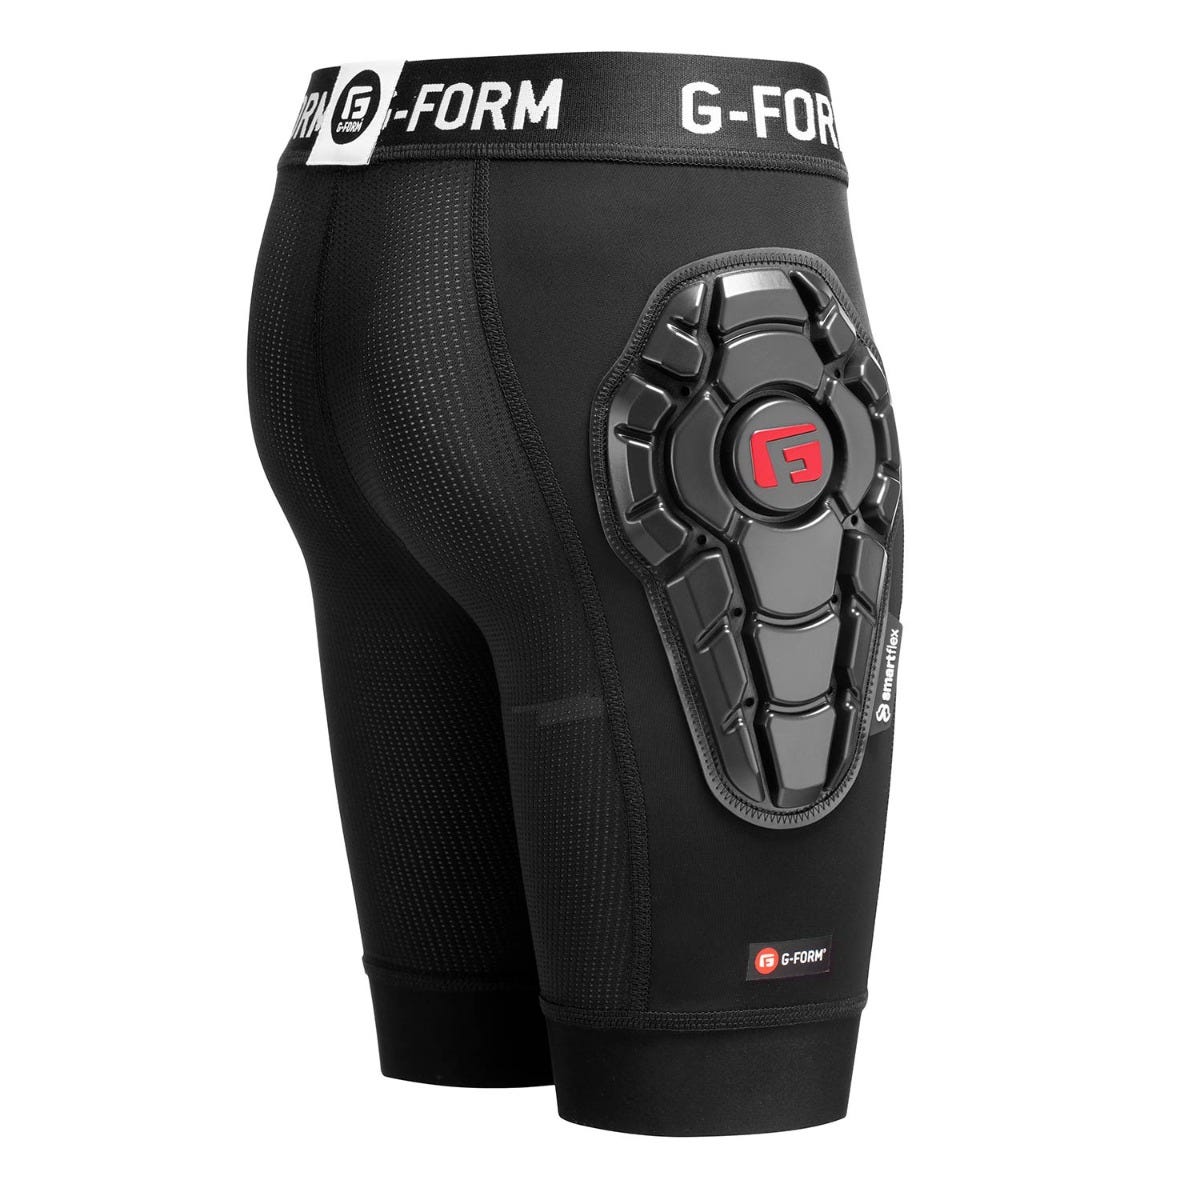 Padded Compression Shorts-Youth